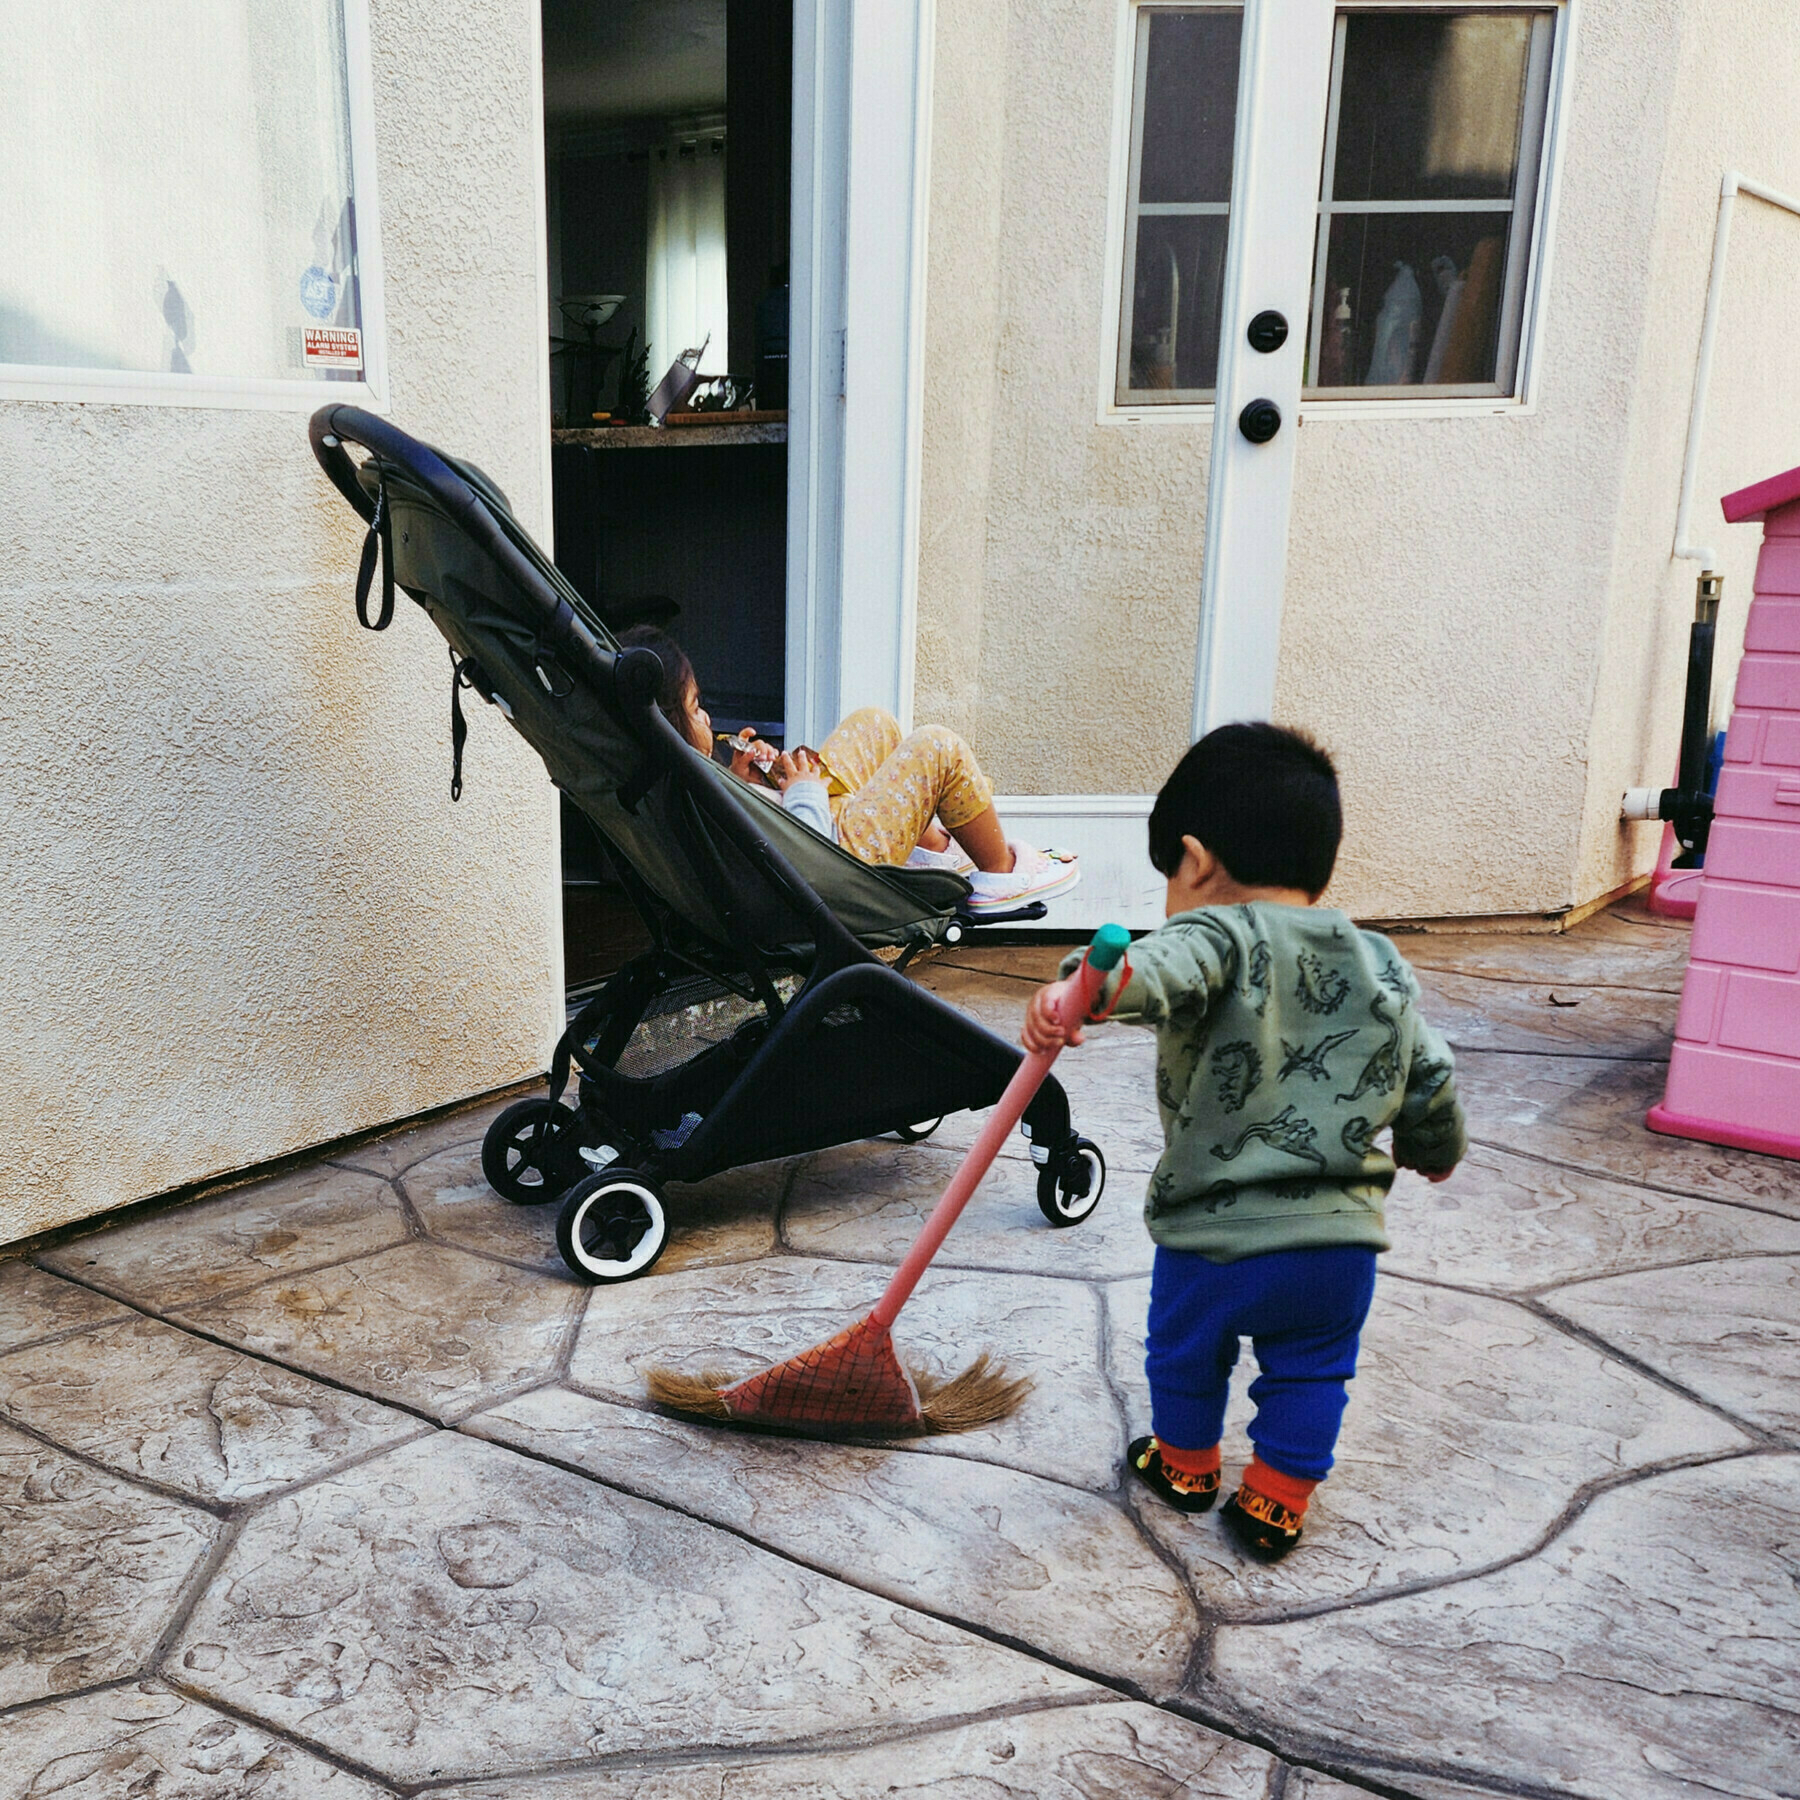 C— waiting in her stroller while J— sweeps the side yard with a broom his size